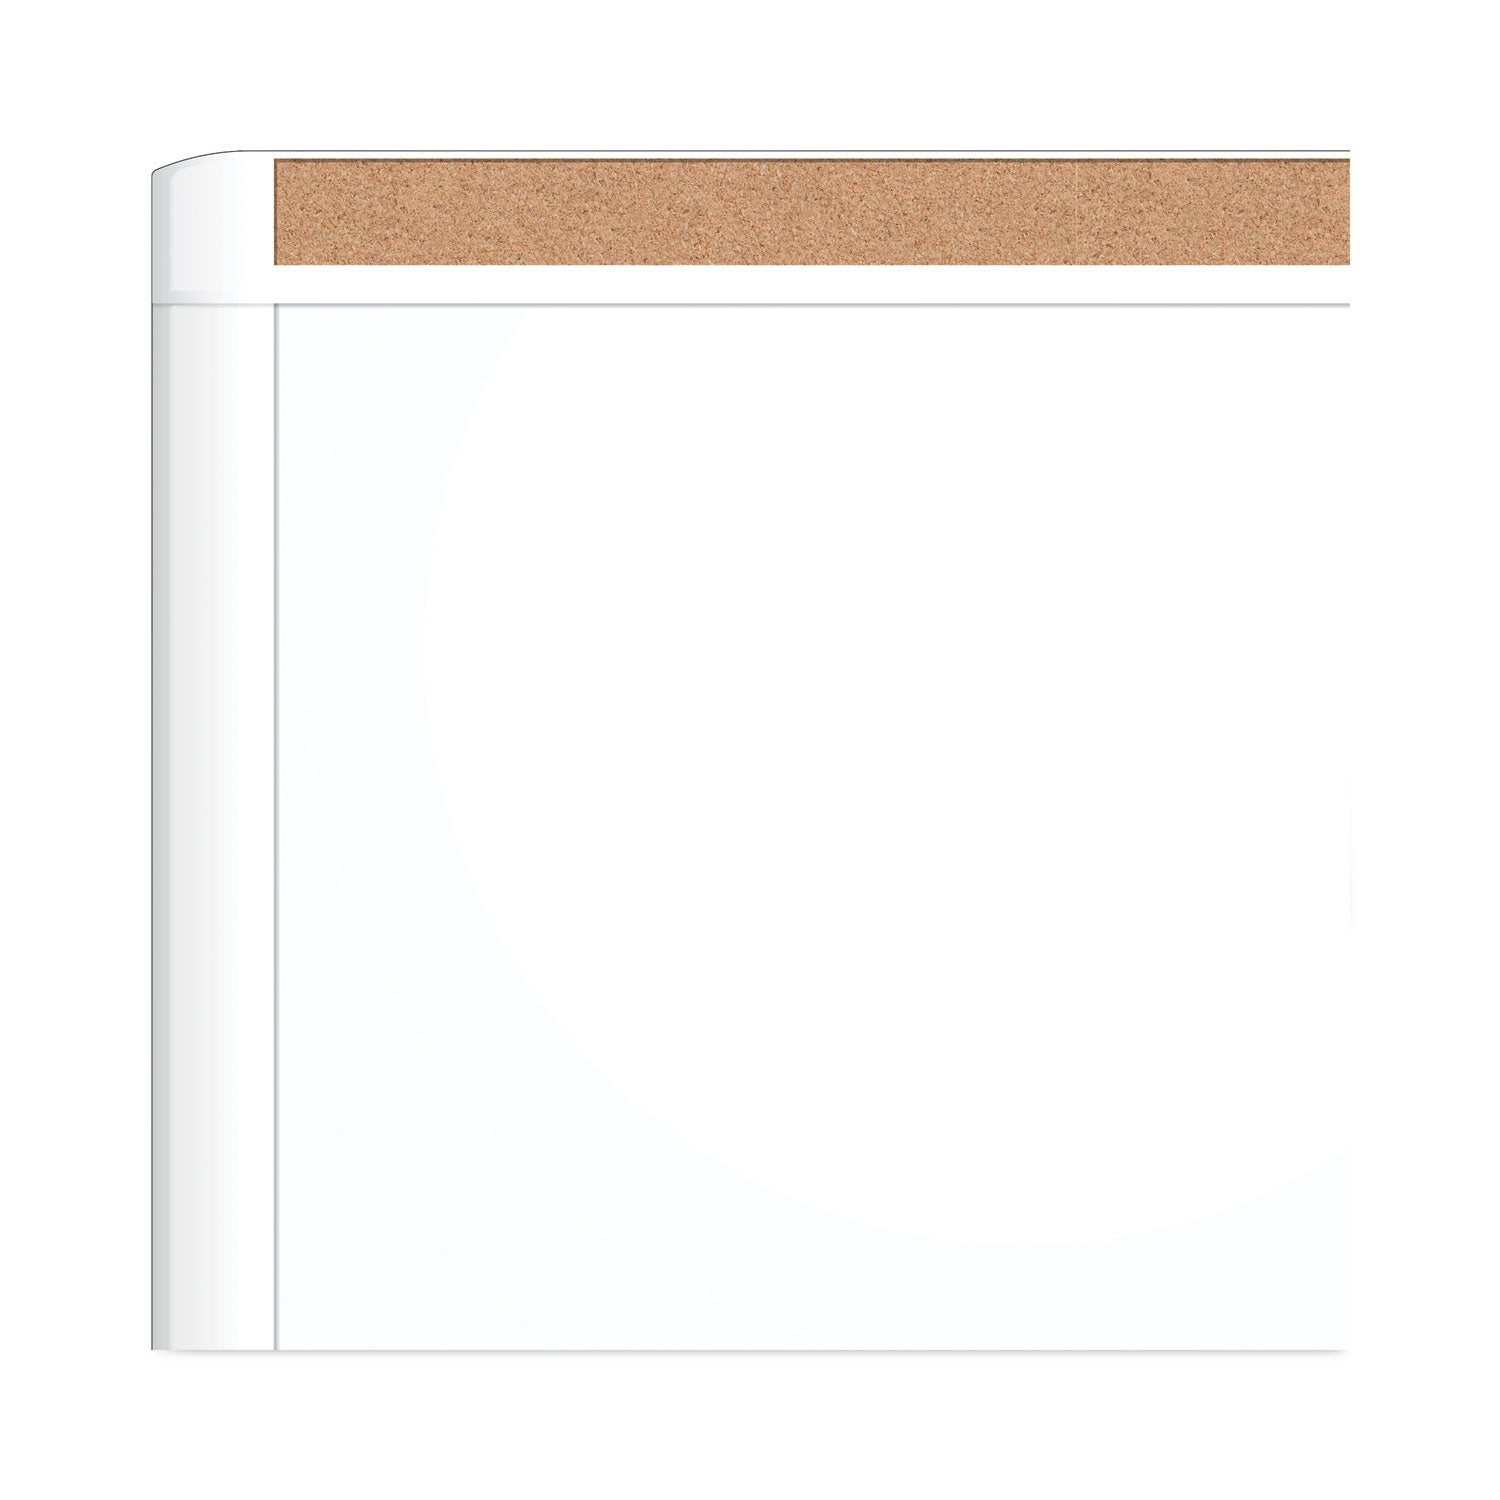 pinit-magnetic-dry-erase-board-with-plastic-frame-20-x-16-white-surface-white-plastic-frame_ubr428u0001 - 3